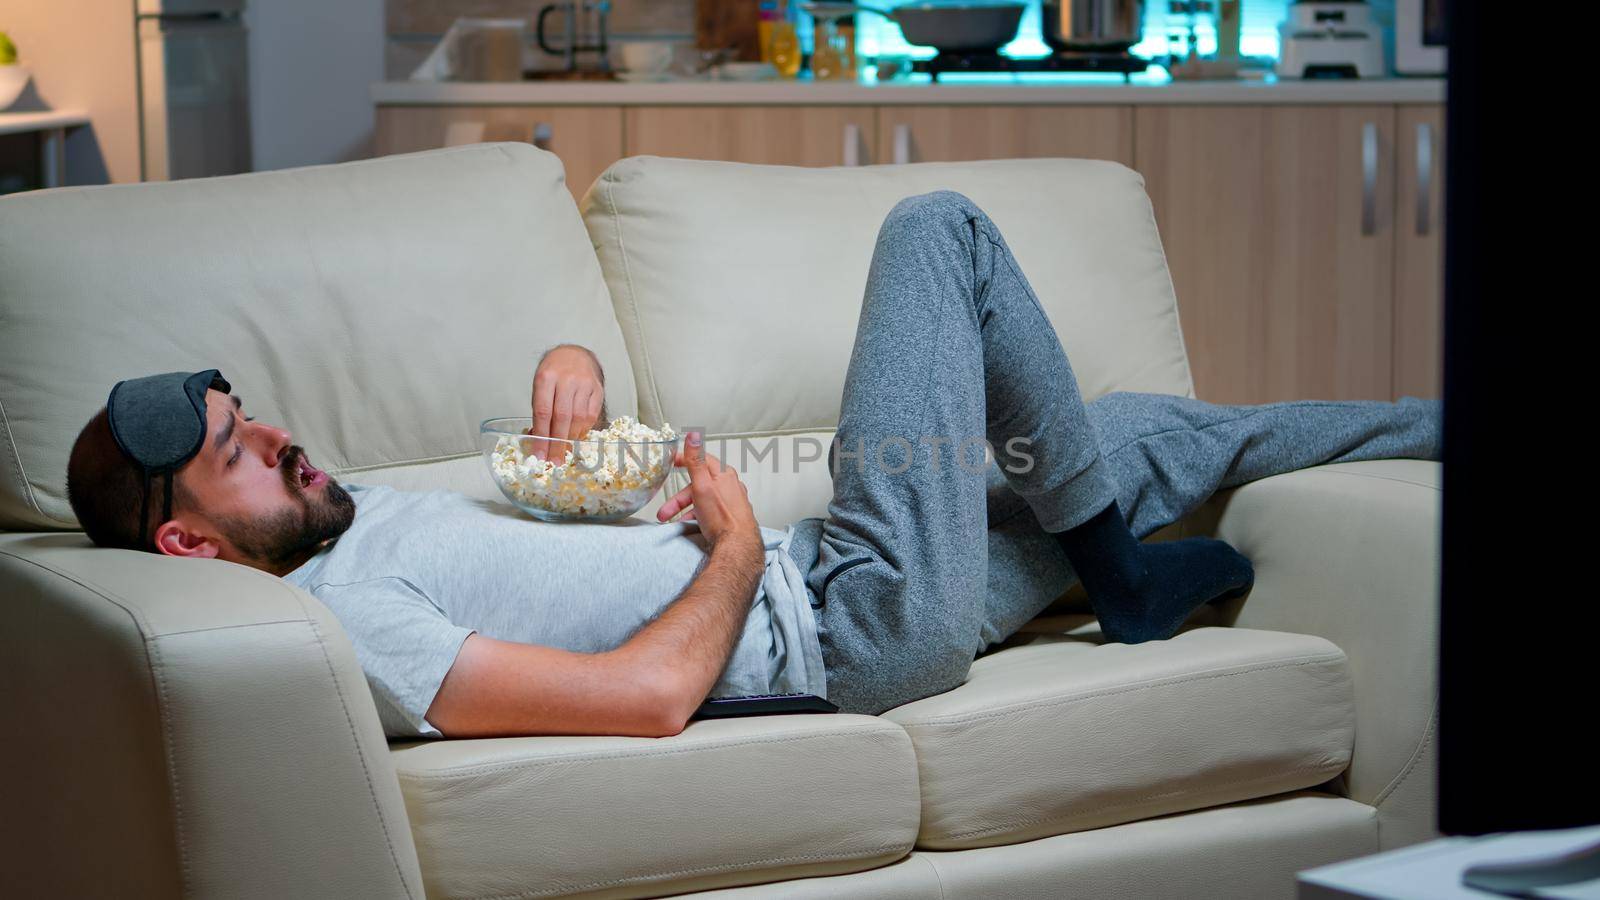 Caucasian man lying in sofa, eating popcron and watching TV late at night in the living room. Enjoying midnight snack, television entertainment, leisure lifestyle evening show